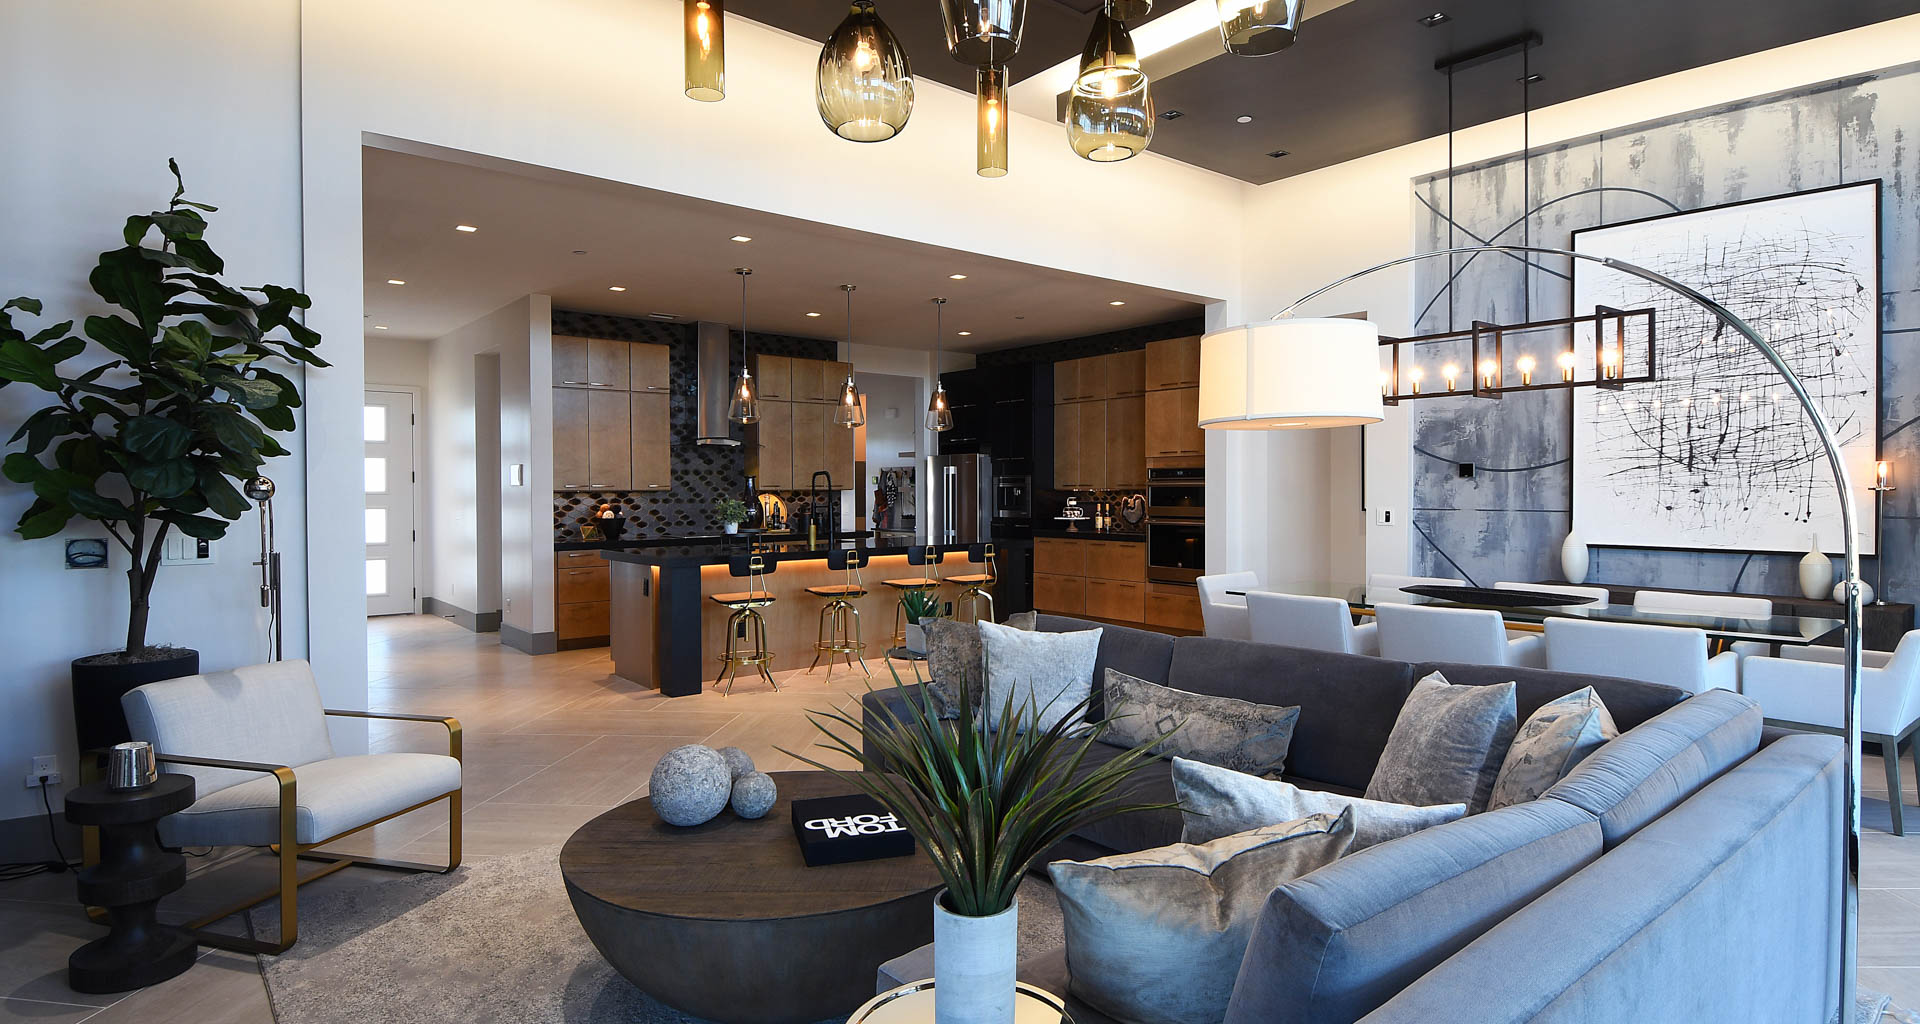 The main living area of the KB Home ProjeKt. Image: KB Home.